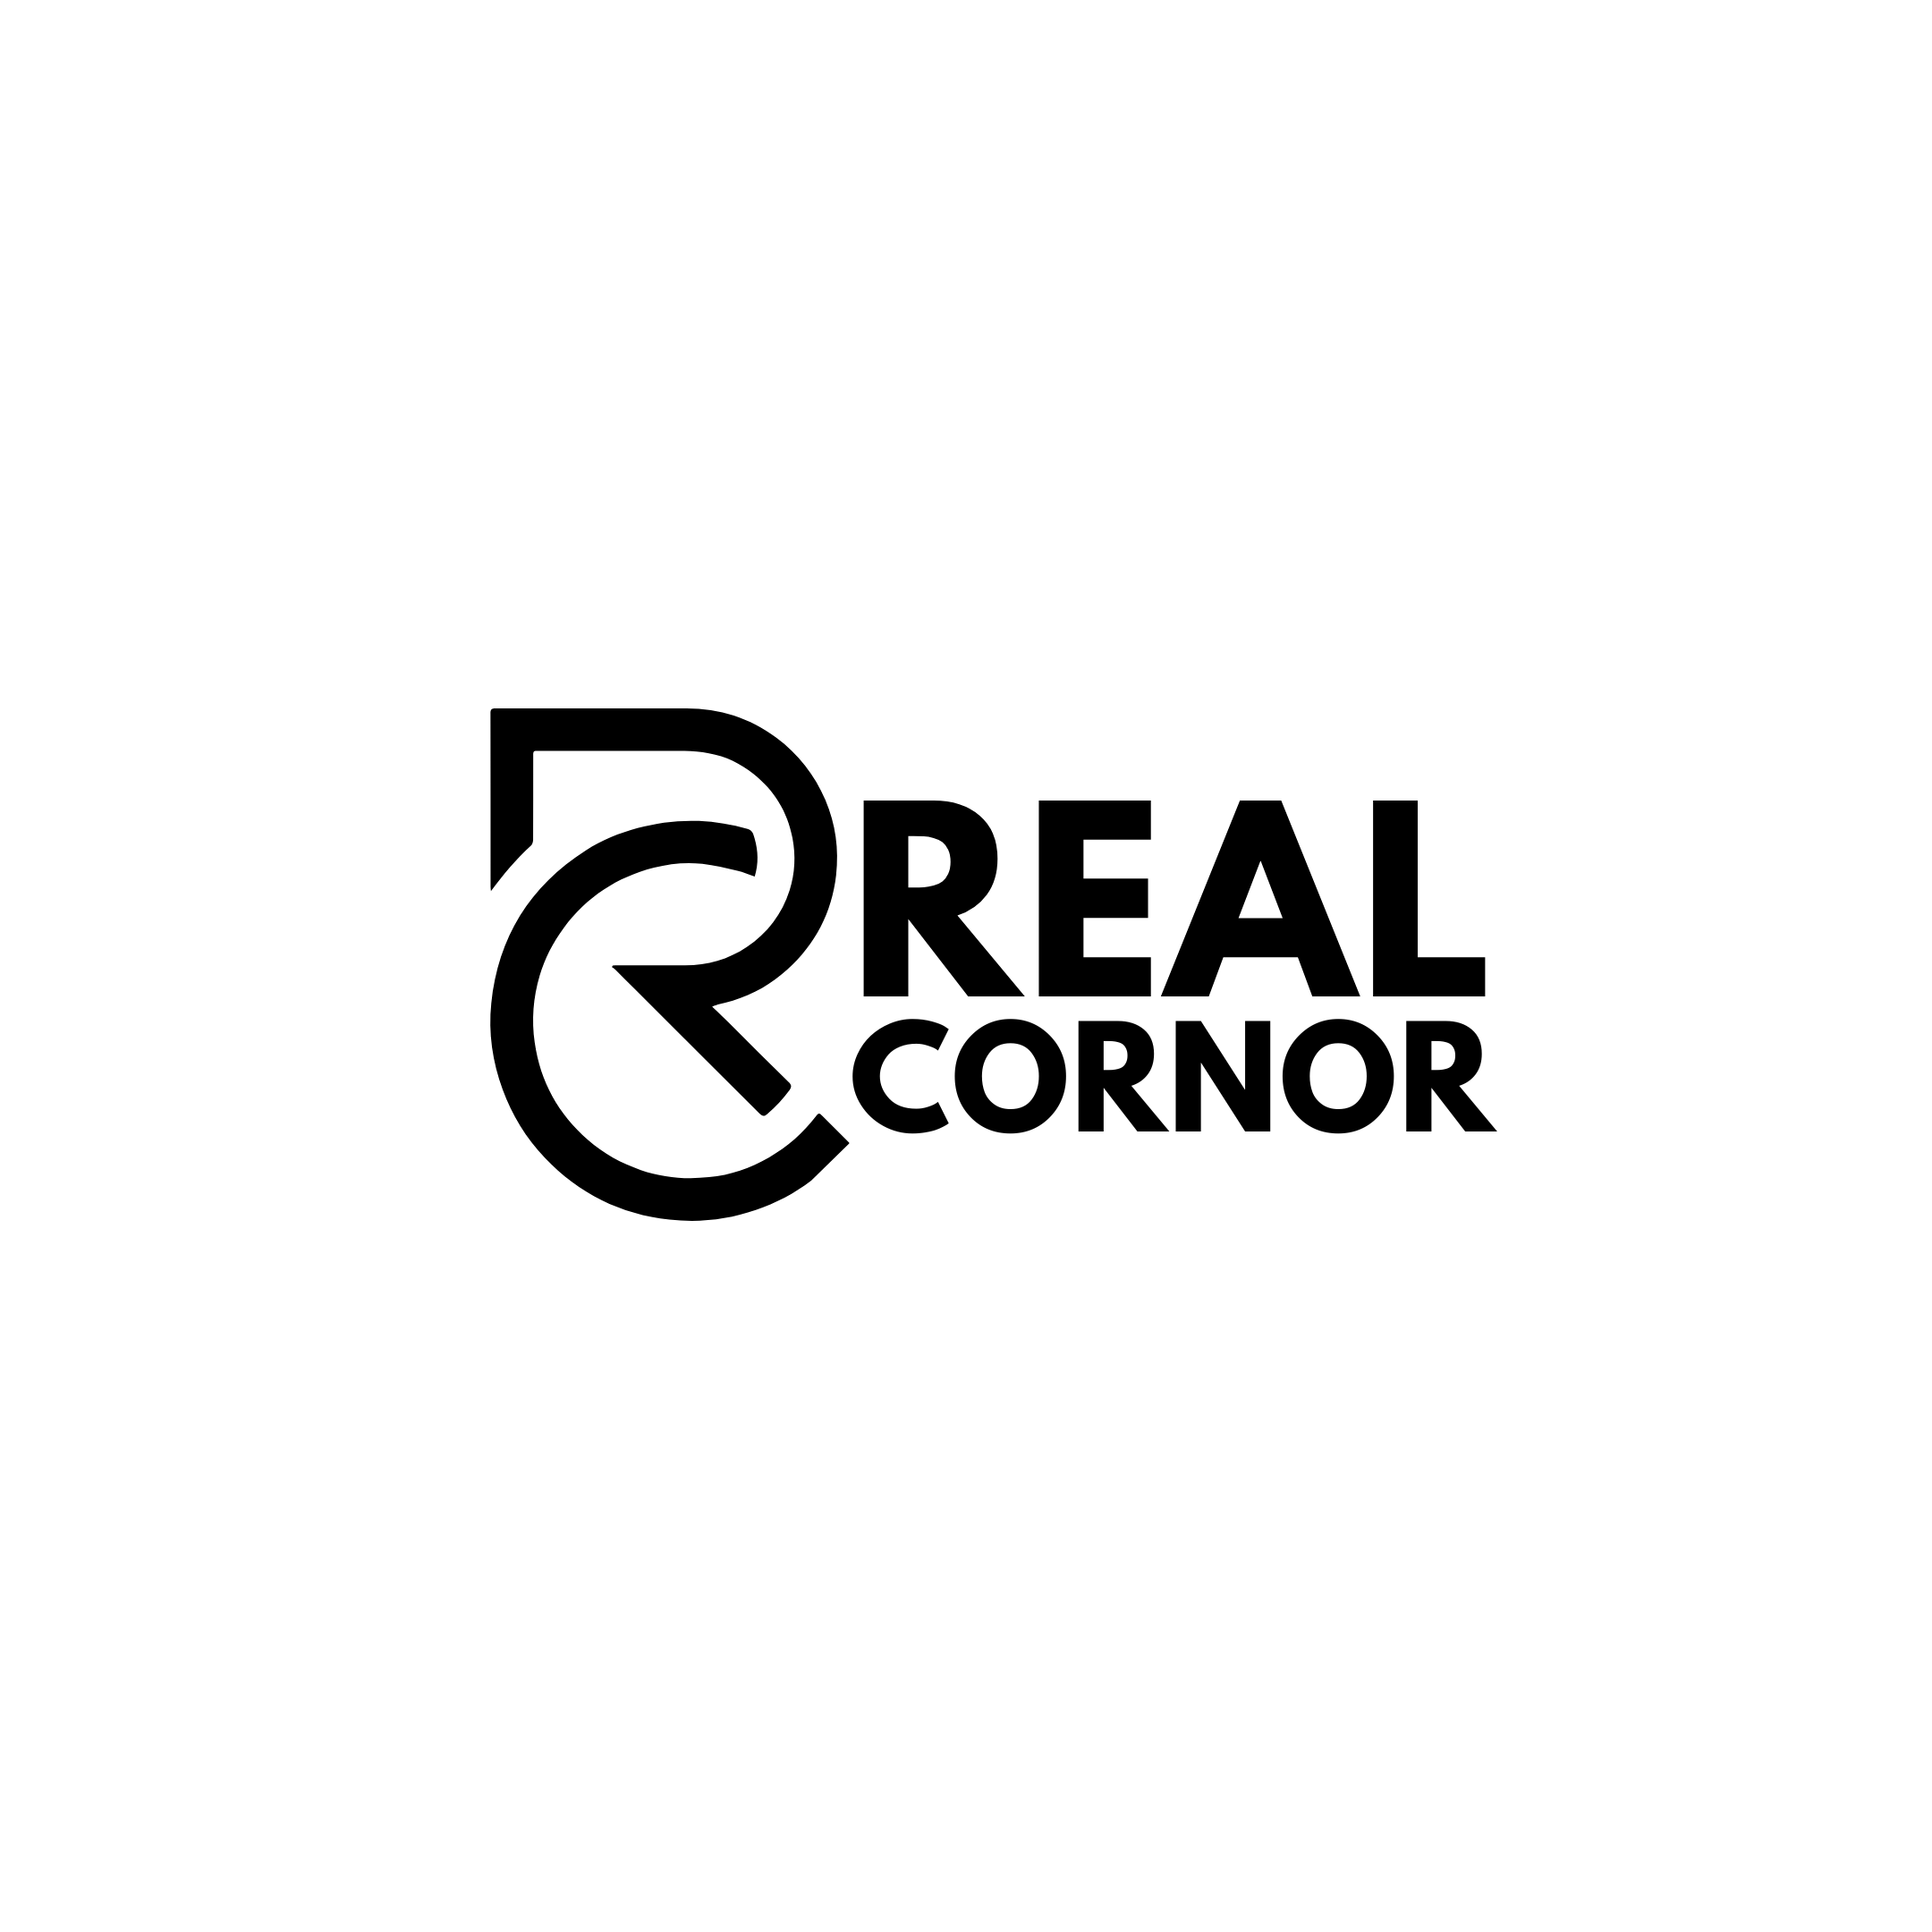 Assortment of luxury scarves, bags, apparel, and accessories from Real Cornor collection